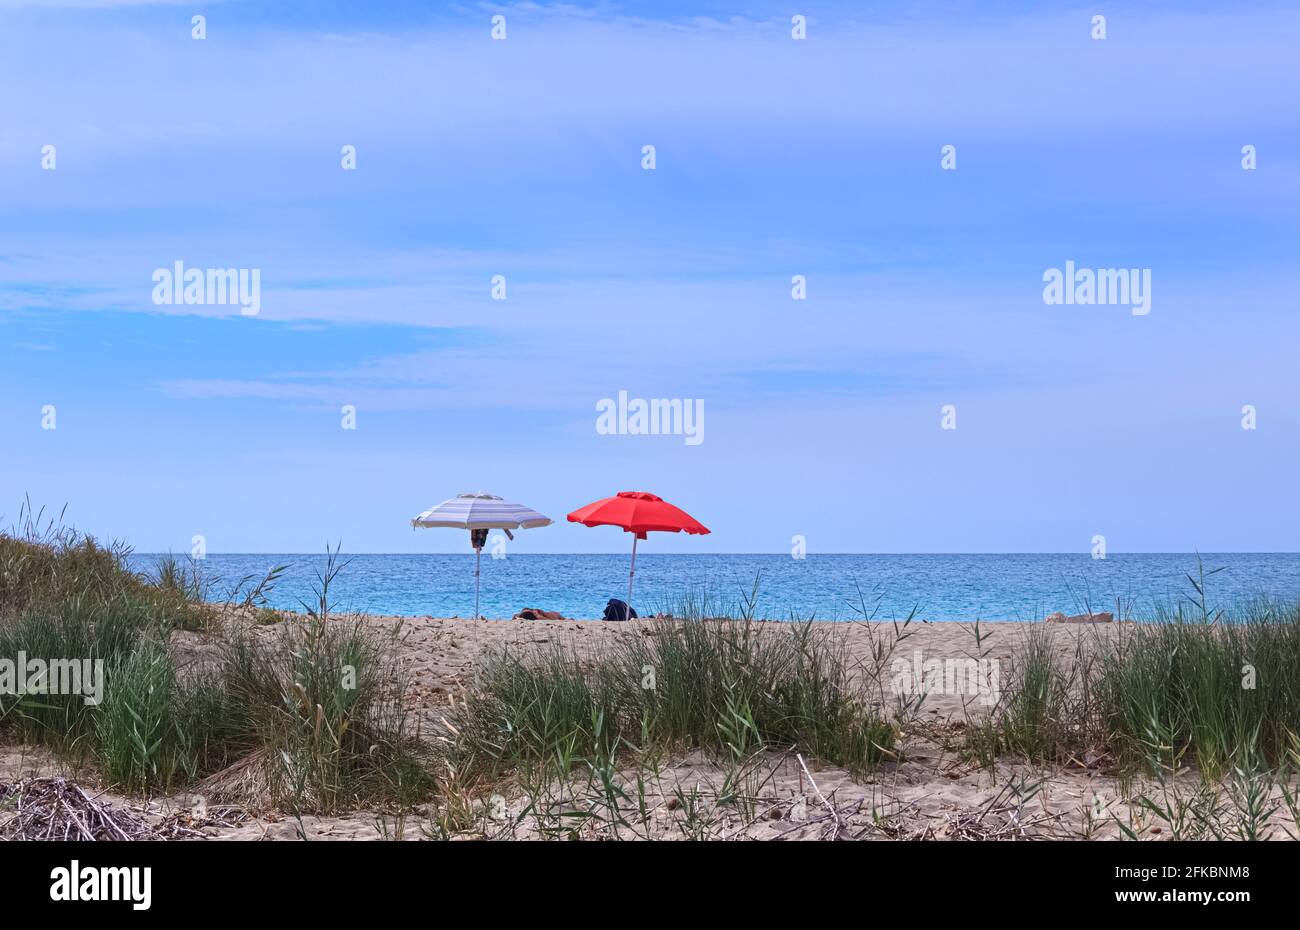 Relax on the beach, Apulia (Italy). Sunbathing tourists with lonely umbrella. Stock Photo